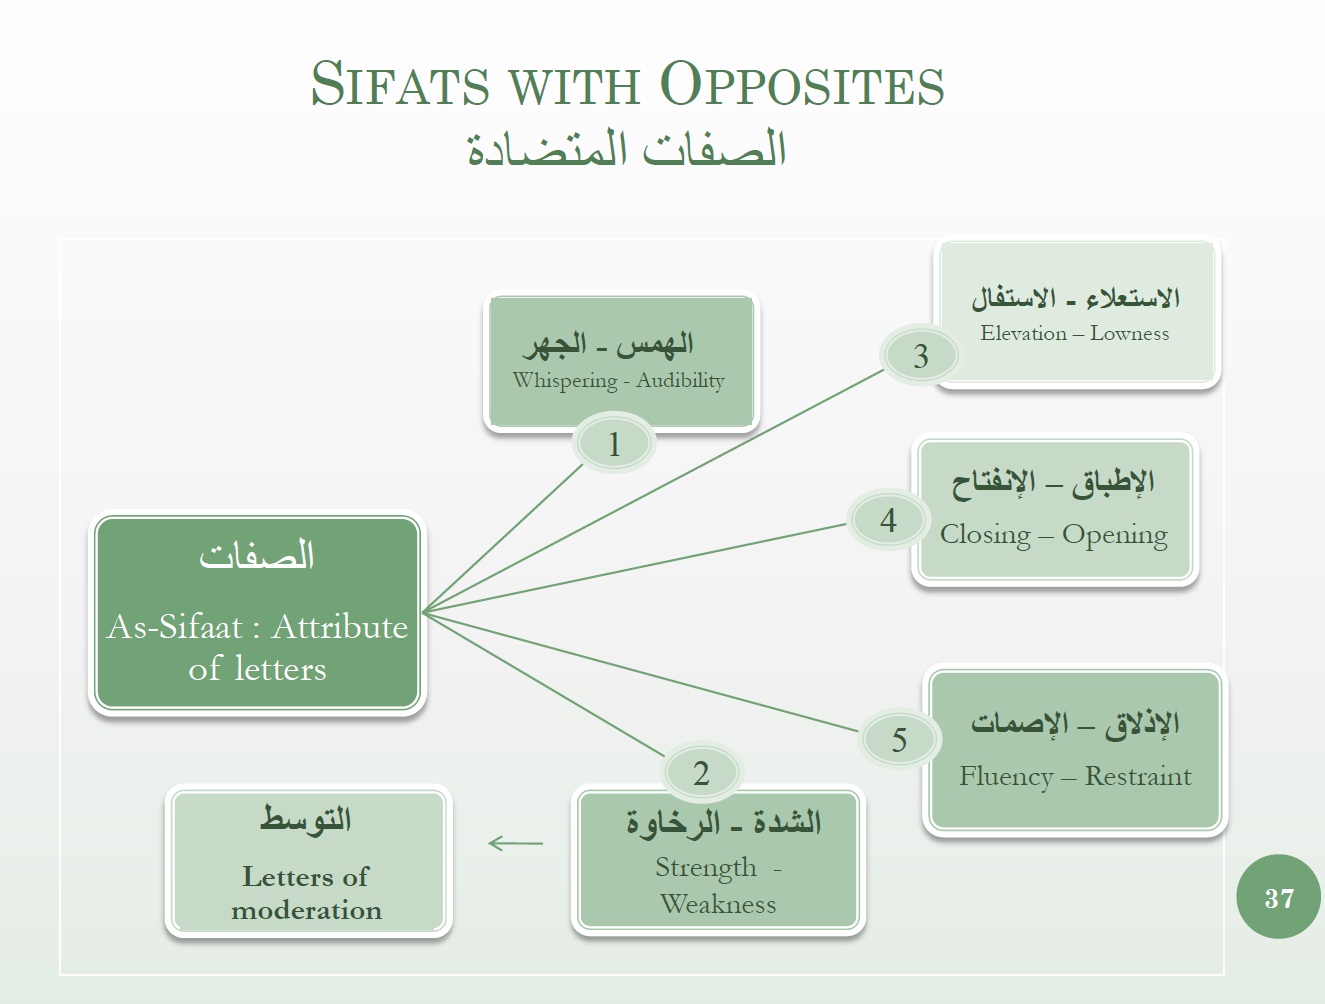 sifat-with-opposites-overview